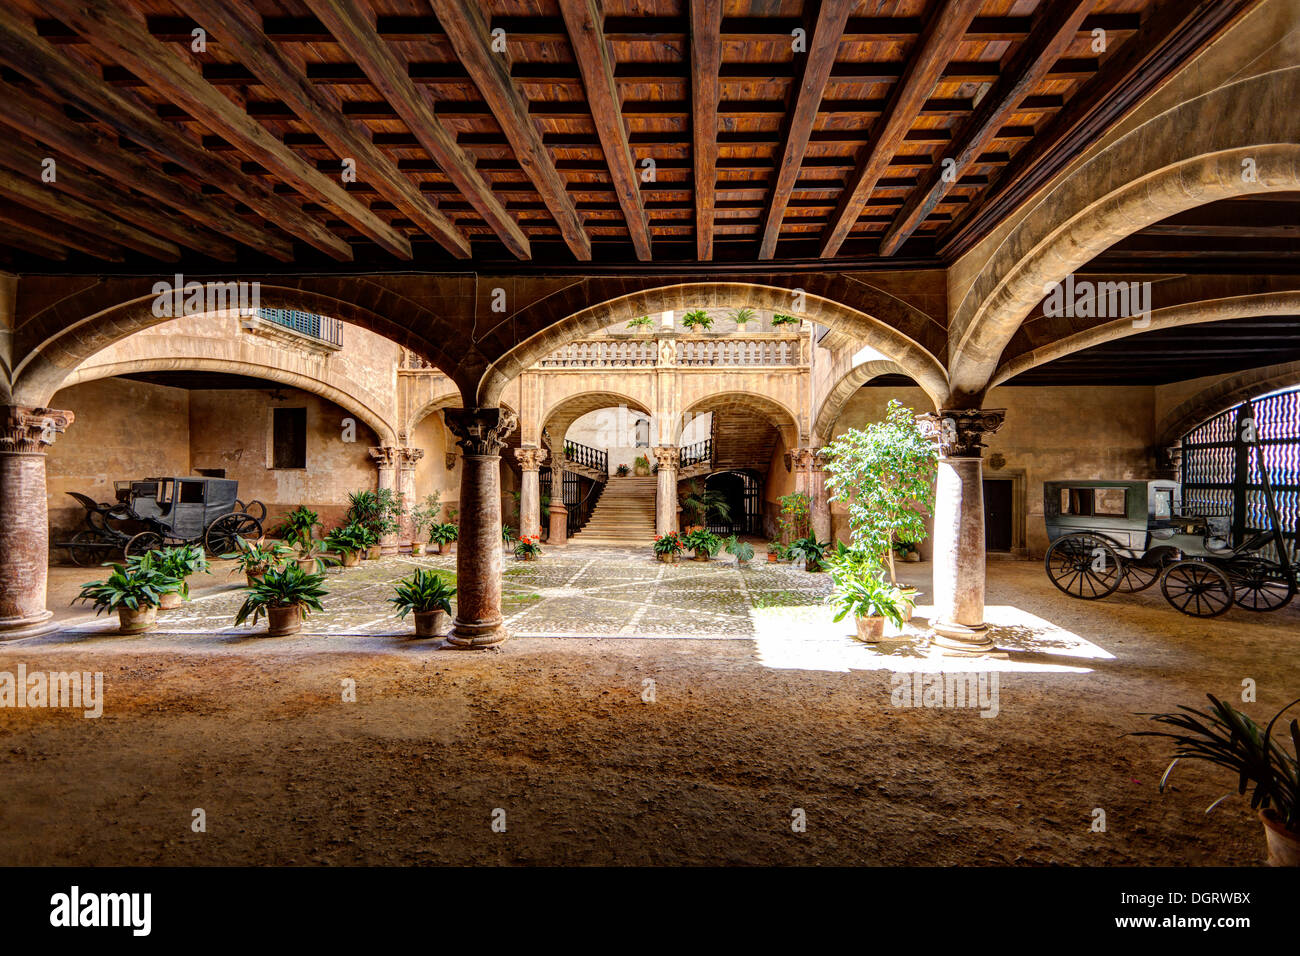 Inner courtyard with old carriages, historic town centre, Palma de Majorca, Majorca, Balearic Islands, Spain, Europe Stock Photo